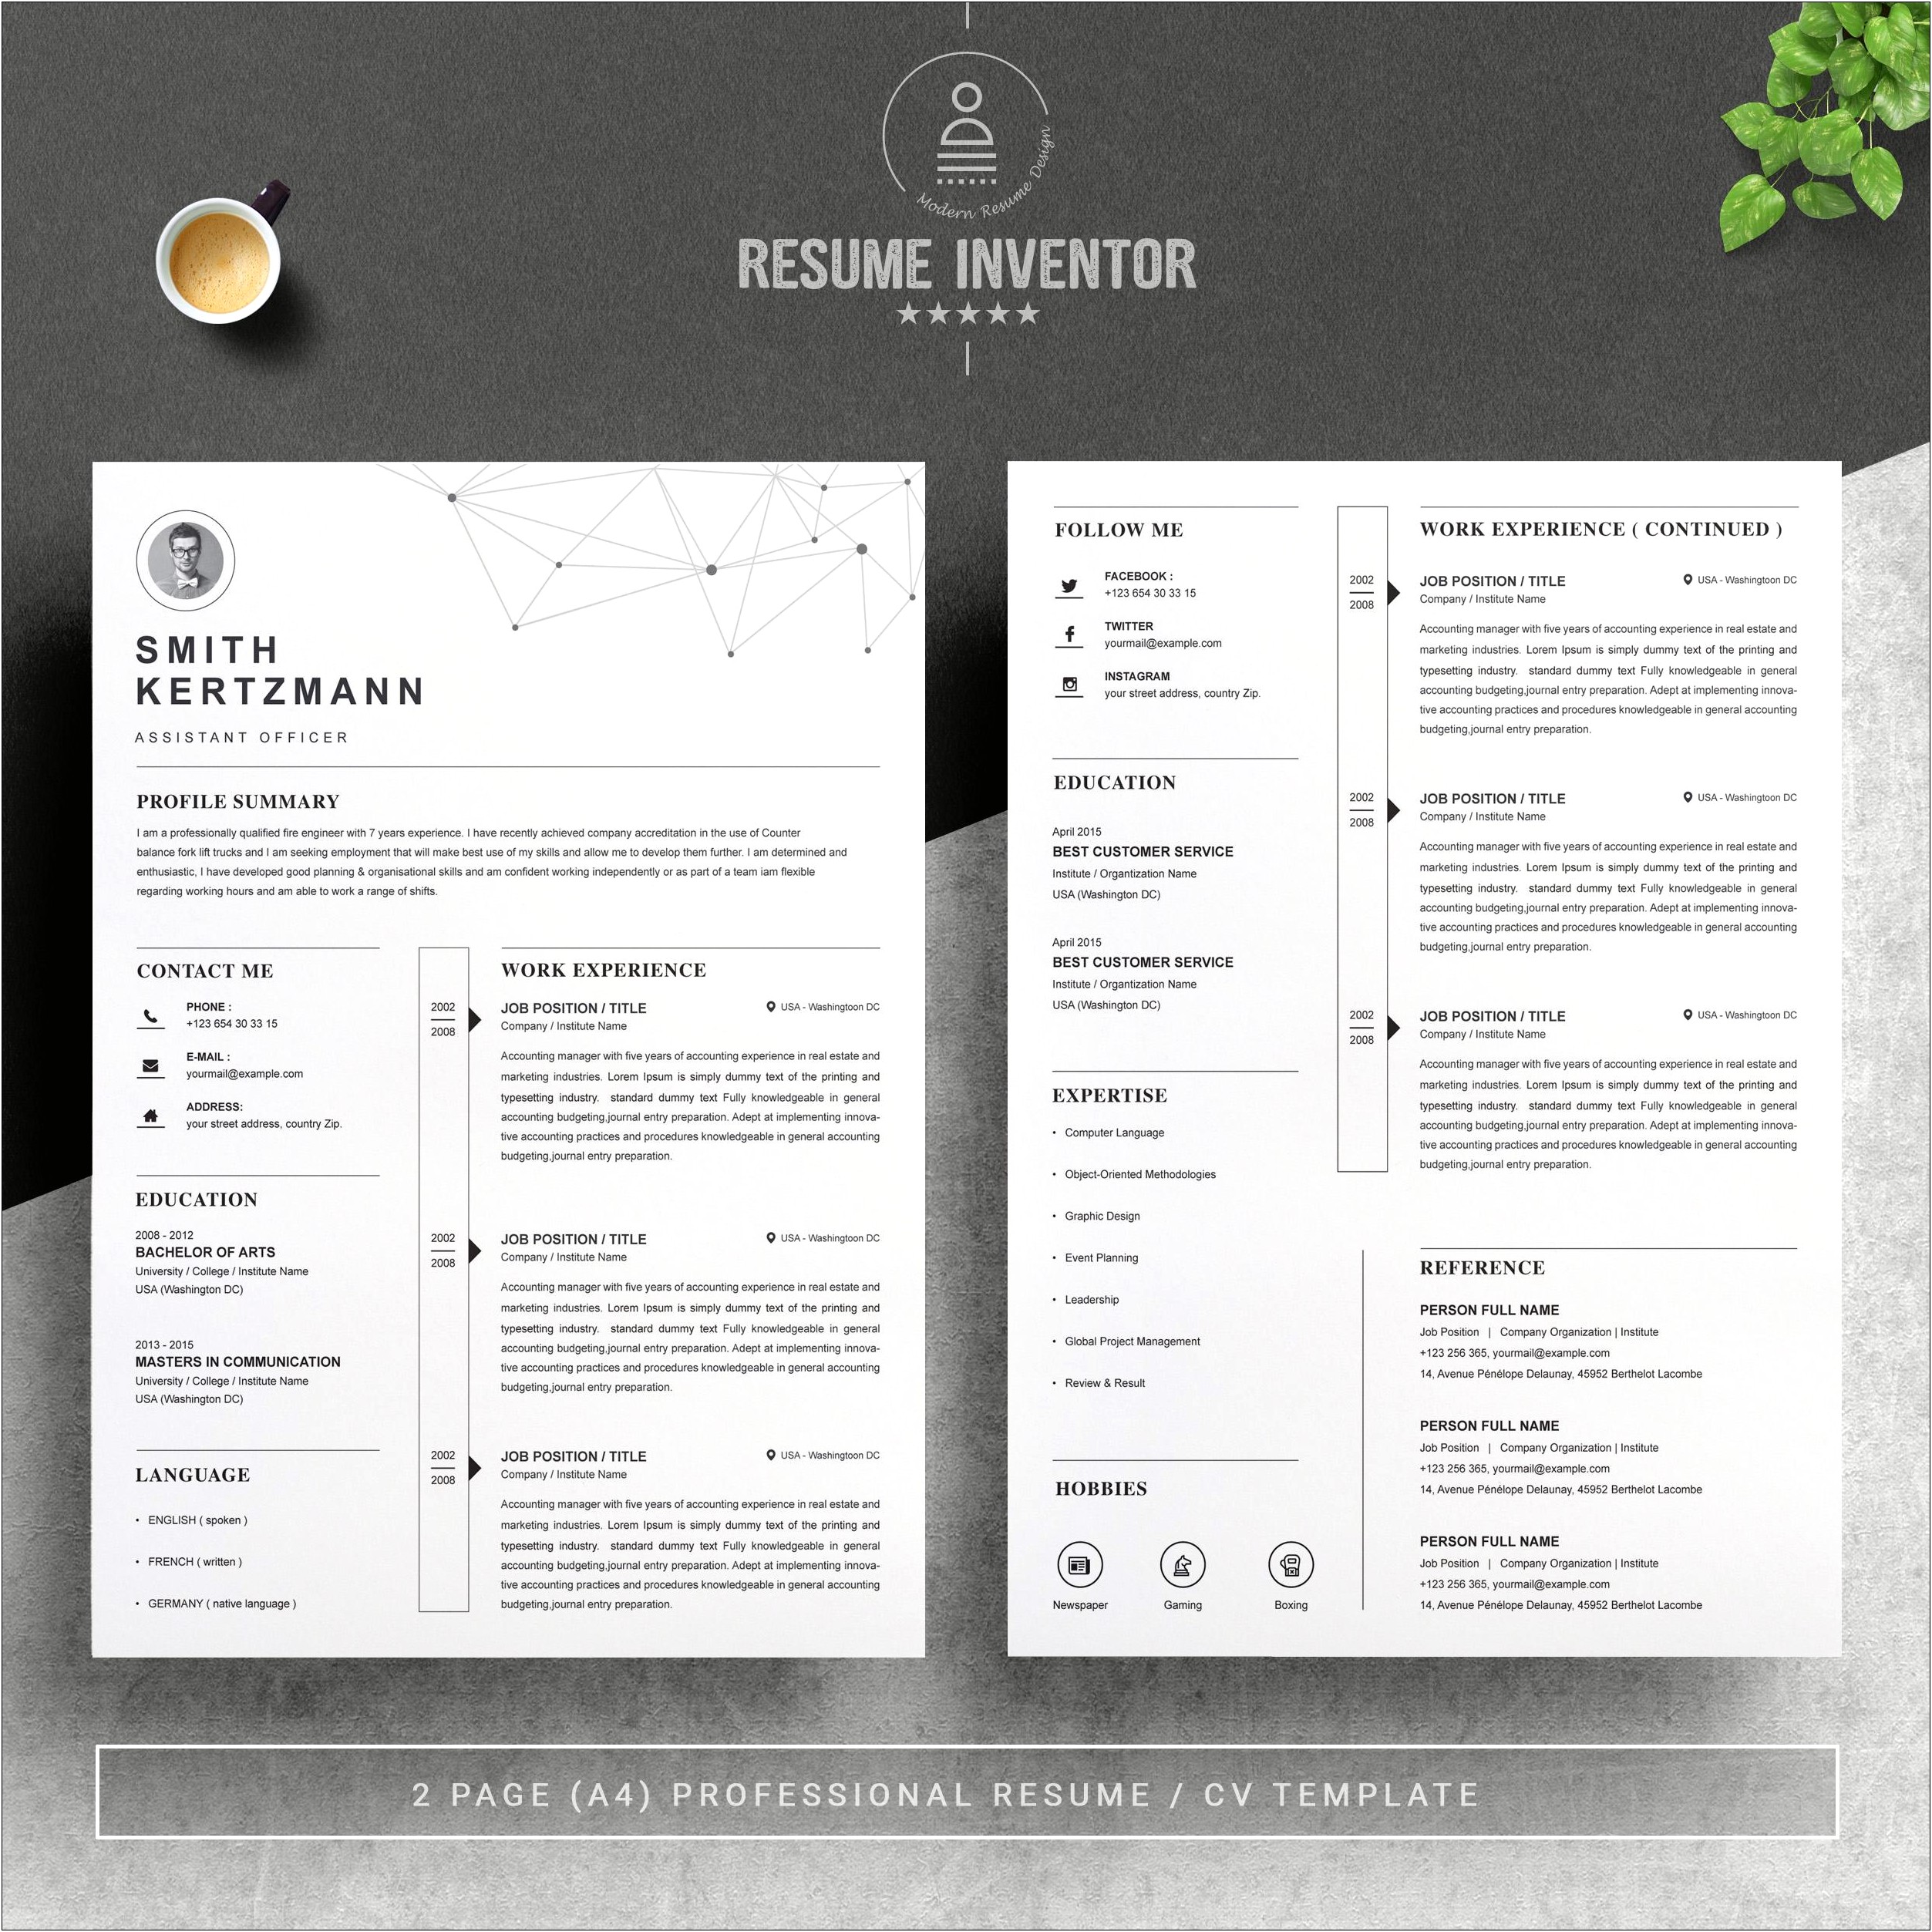 Resume Template For Career Change Duymmies